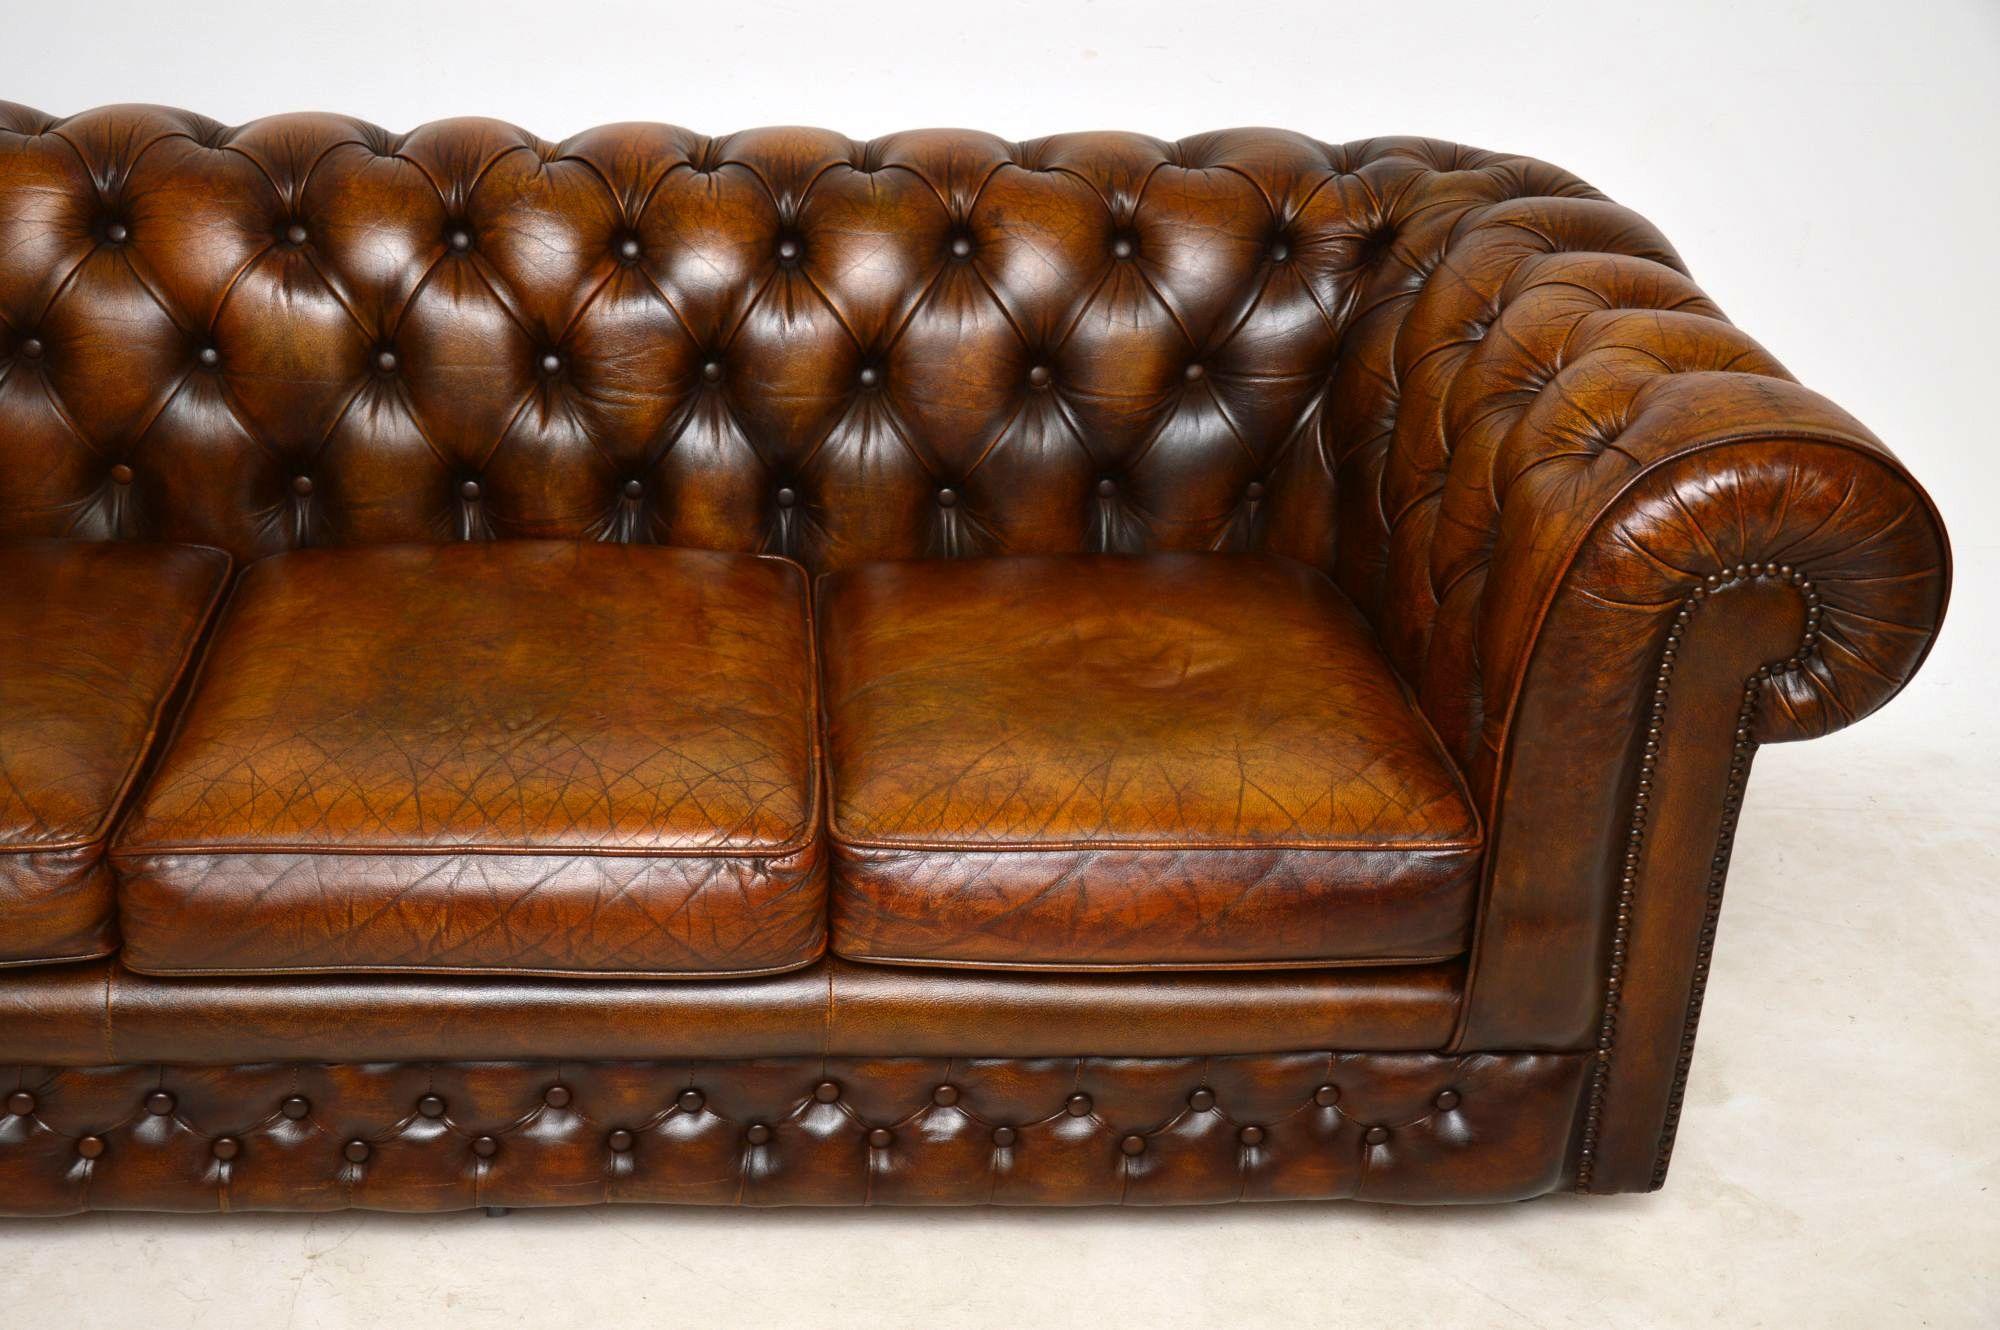 English Antique Deep Buttoned Leather Chesterfield Sofa